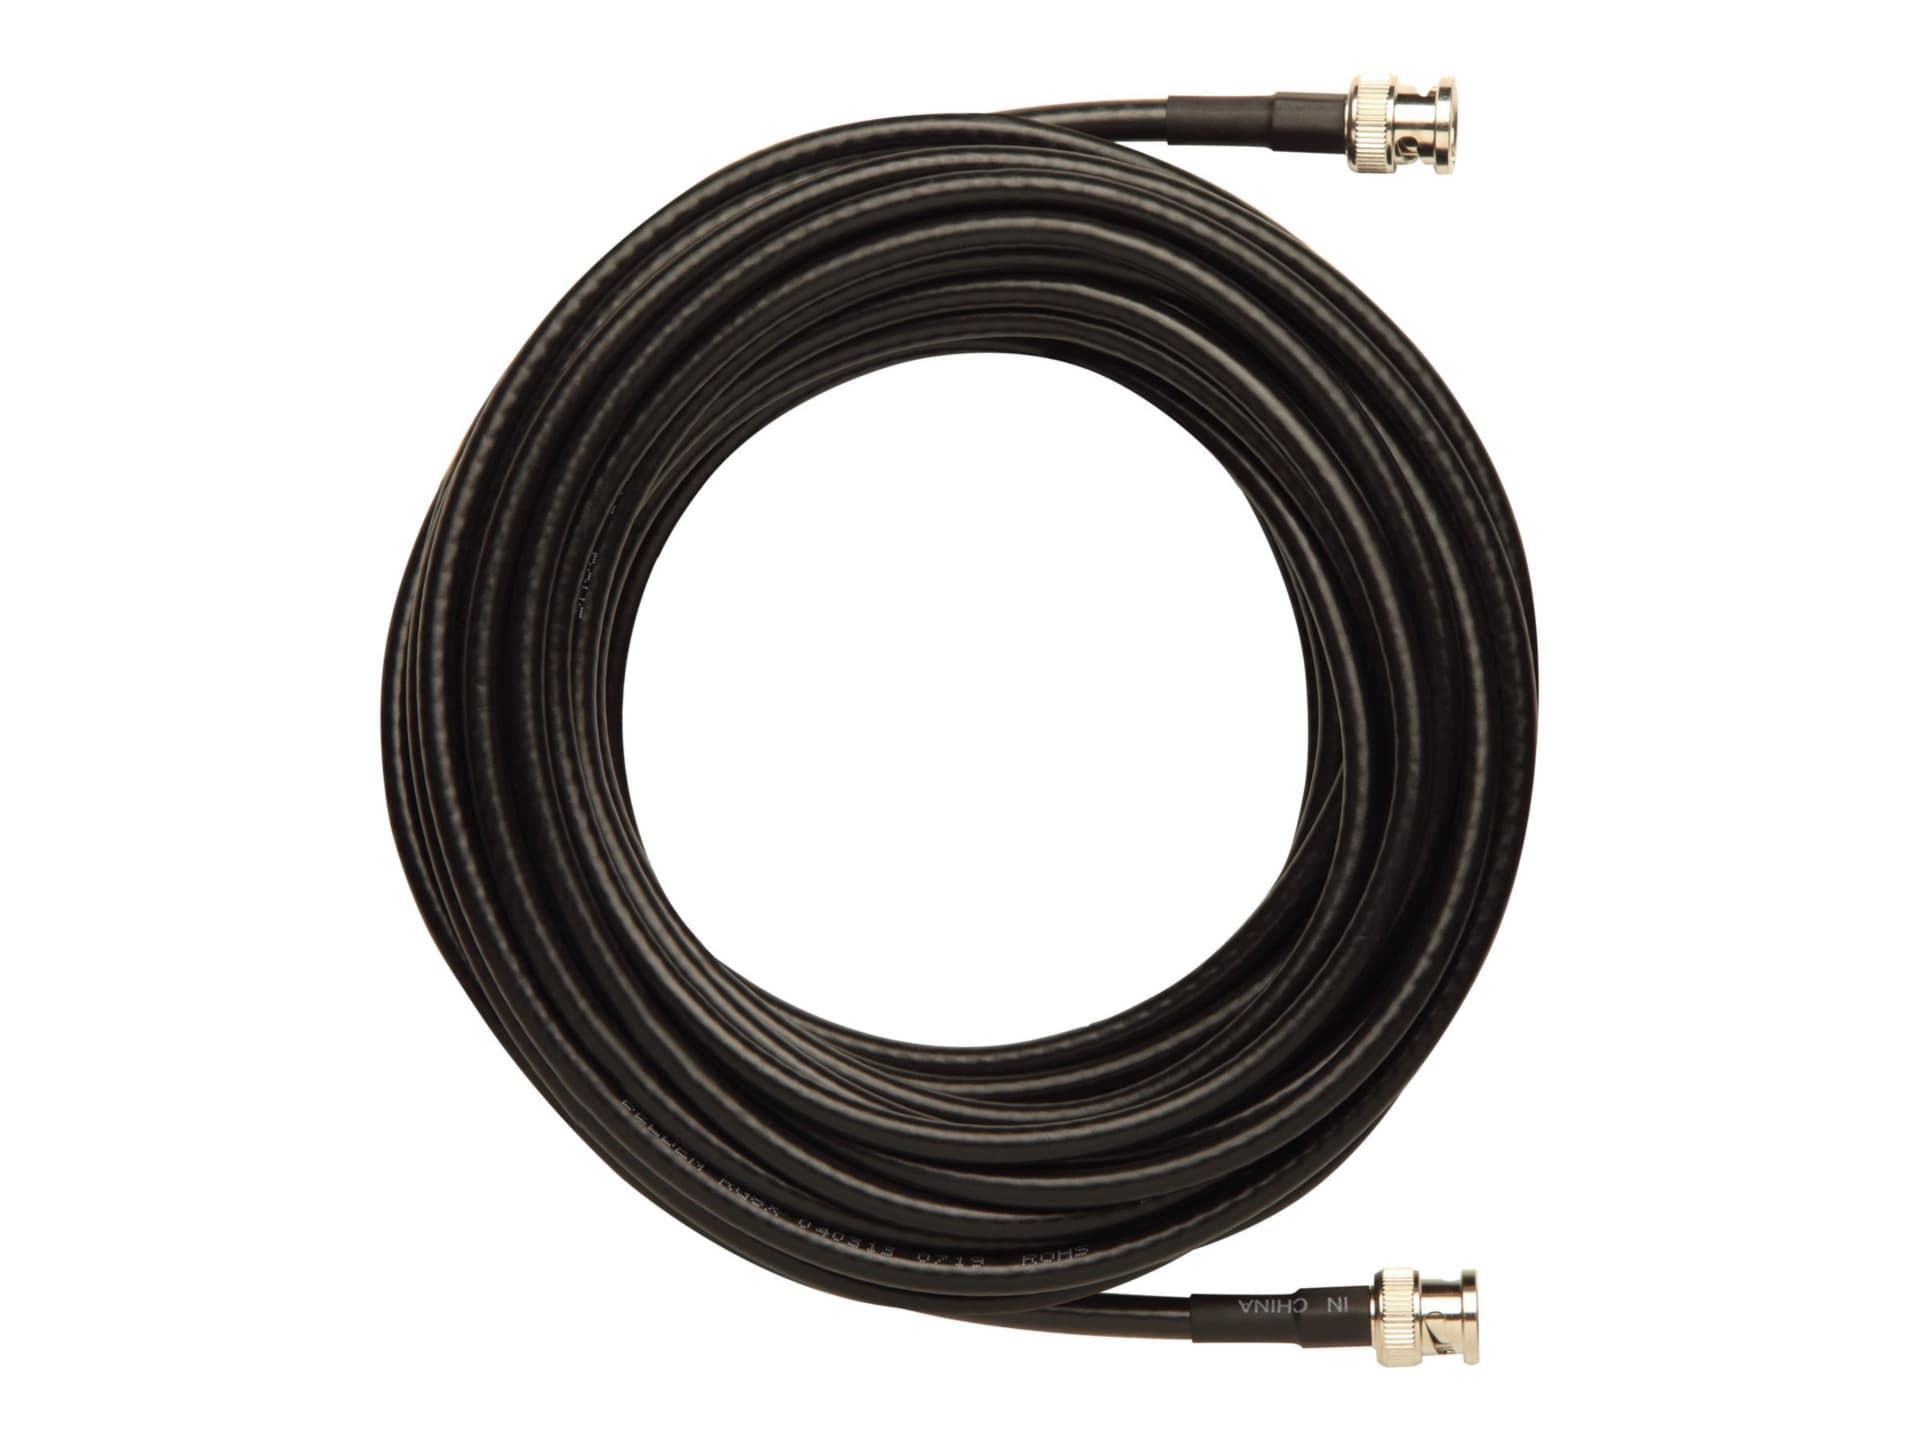 Shure UA850 - antenna cable - 49 ft